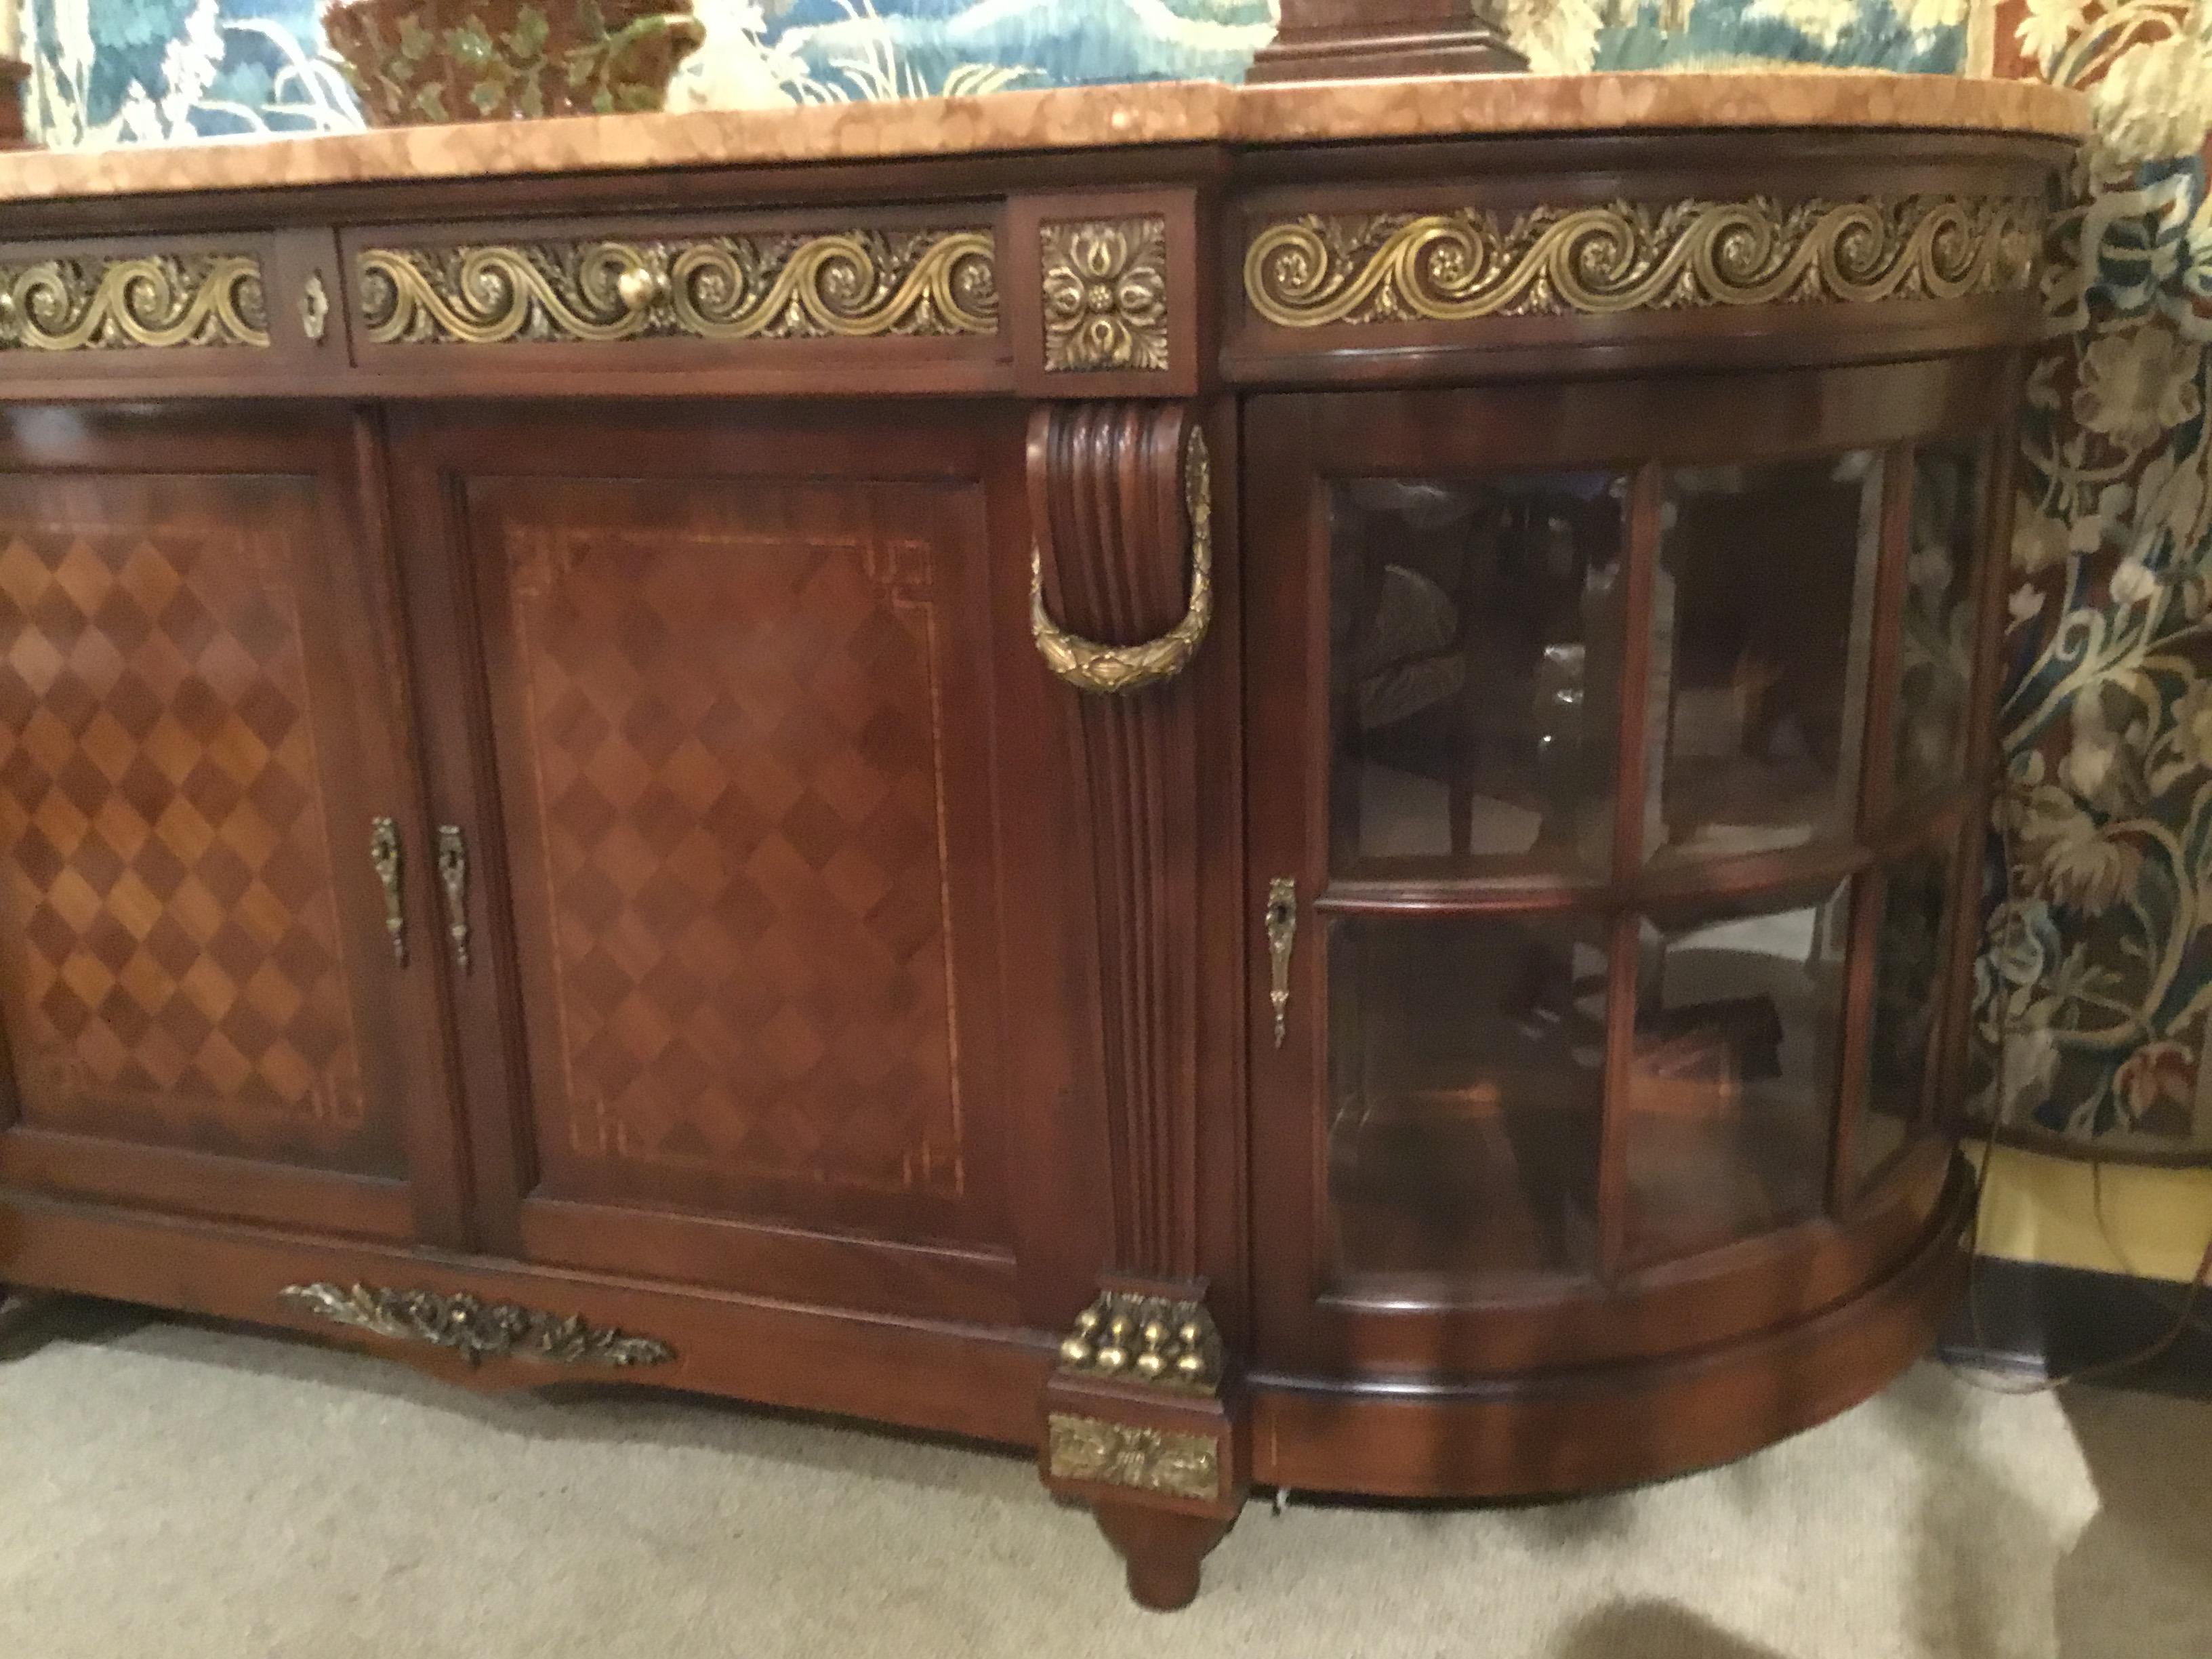 Large and impressive sideboard with a marble top and lovely bronze mounts. Curved sides
add a graceful presentation. The side doors open to one shelf. Beveled glass panels on
each side make this a great display. Two drawers open at the center top